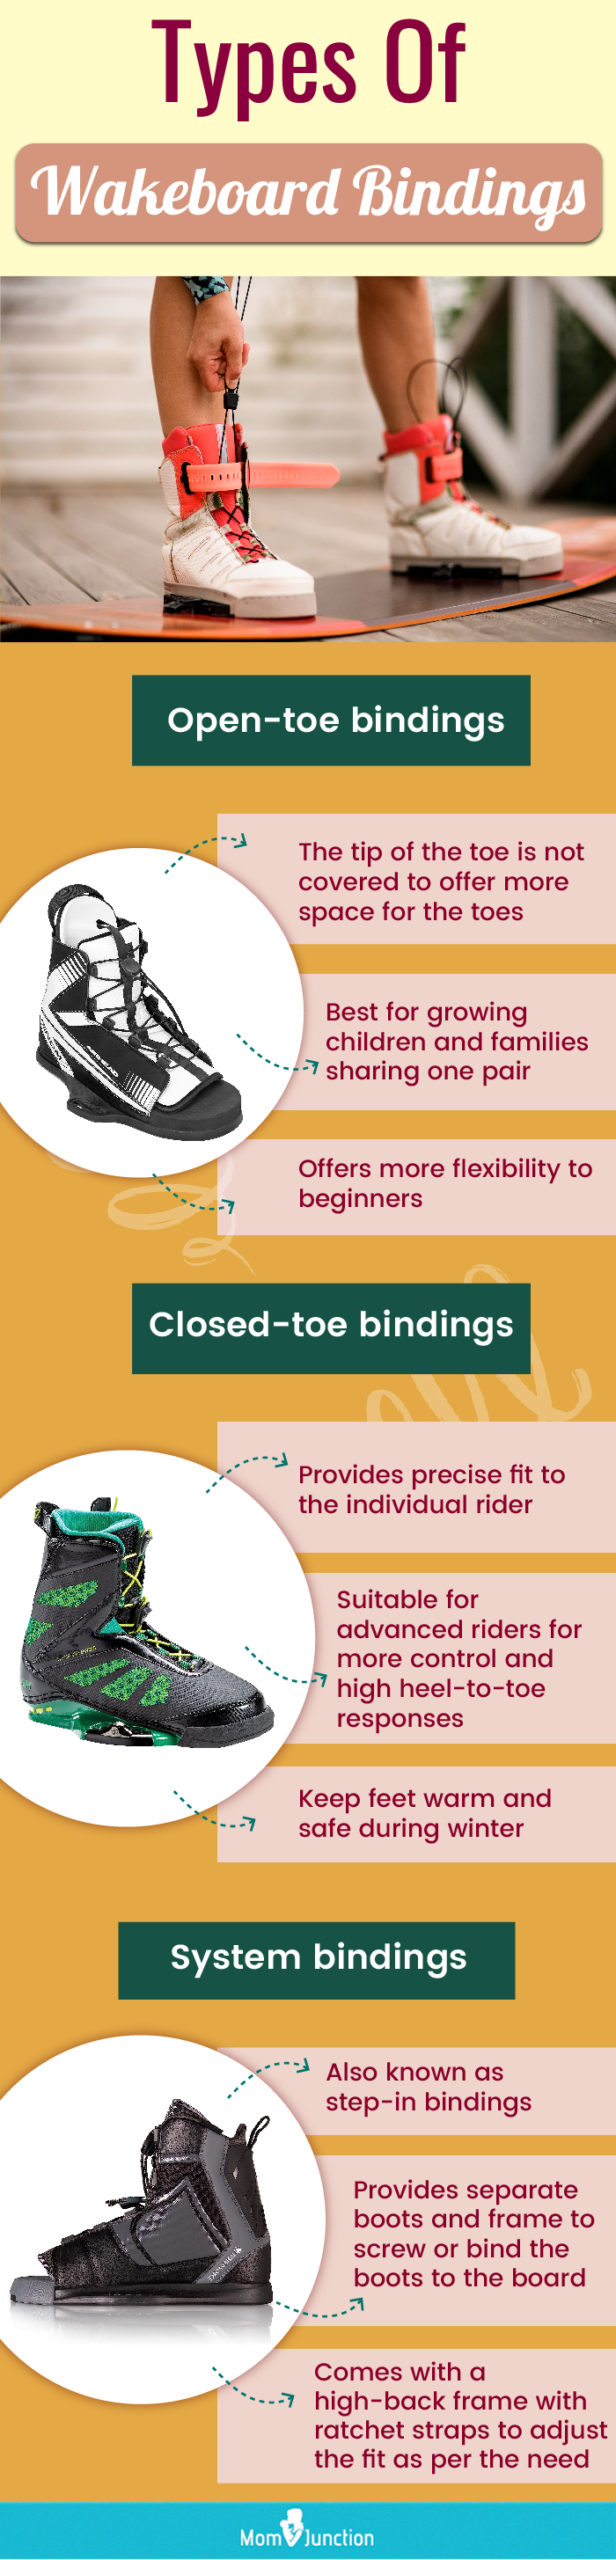 Types Of Wakeboard Bindings (infographic)